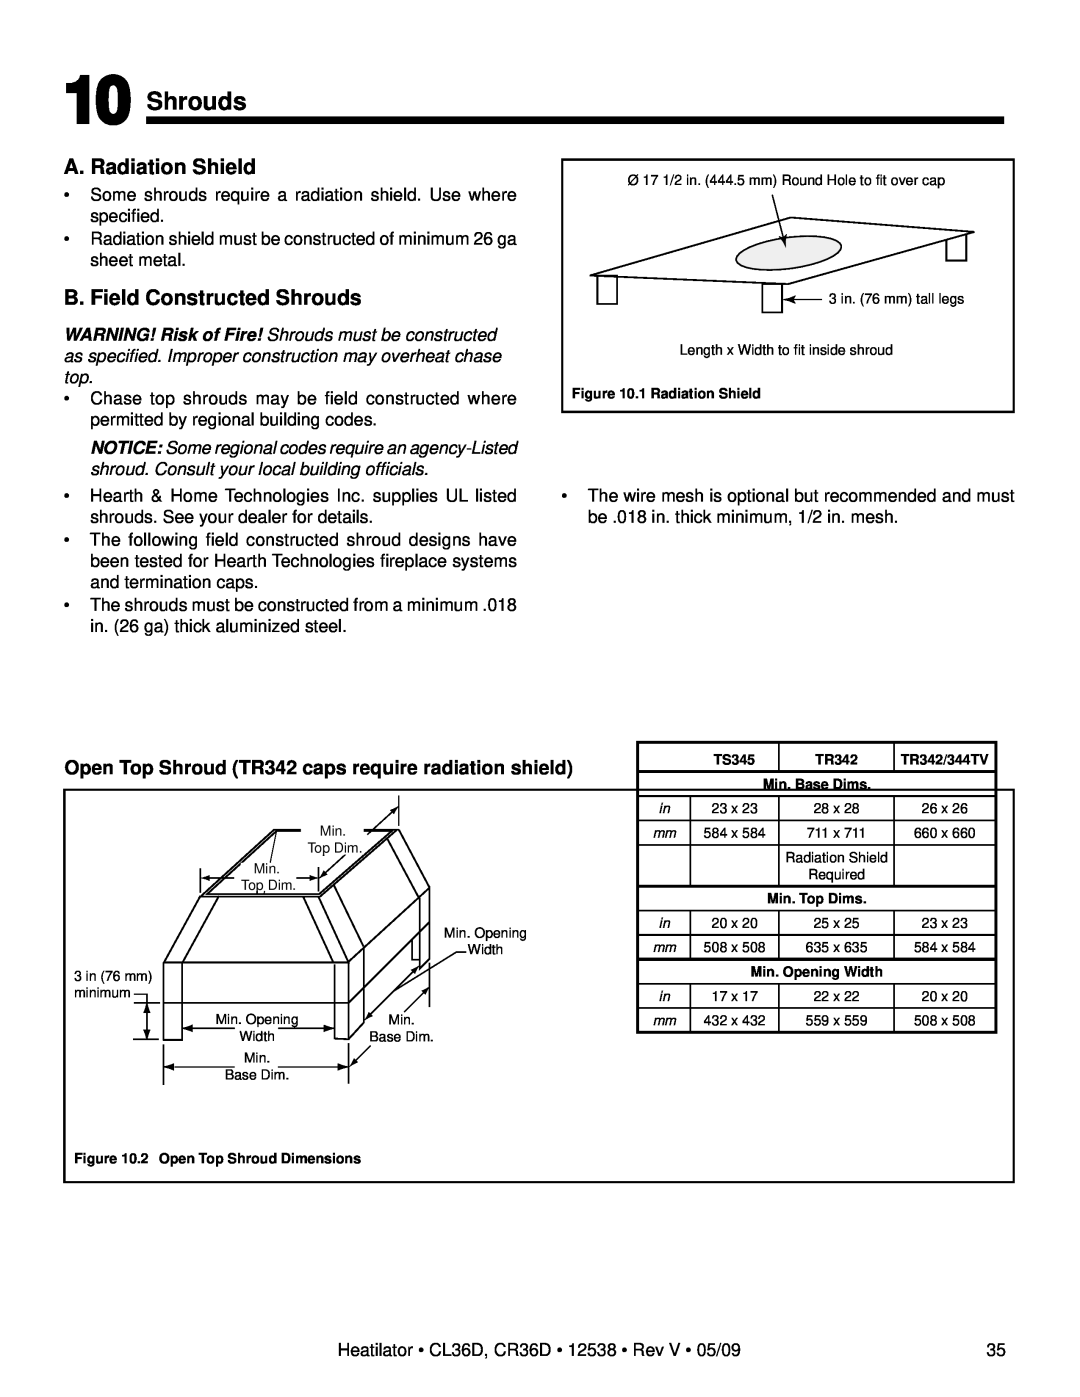 Heatiator CL36D, CR36D owner manual A. Radiation Shield, B. Field Constructed Shrouds 